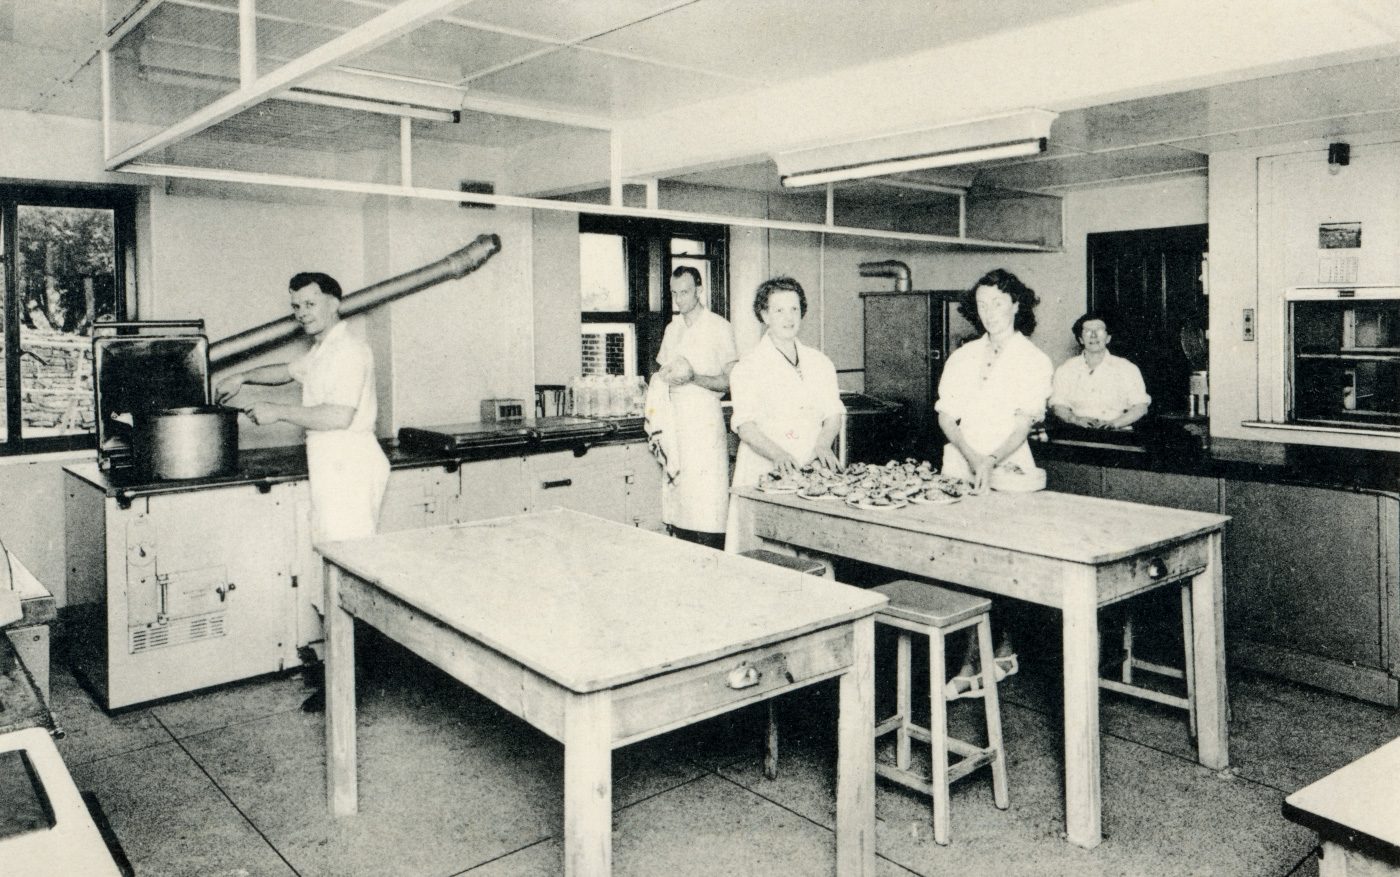 Kitchens in the Miners Convalescent Home